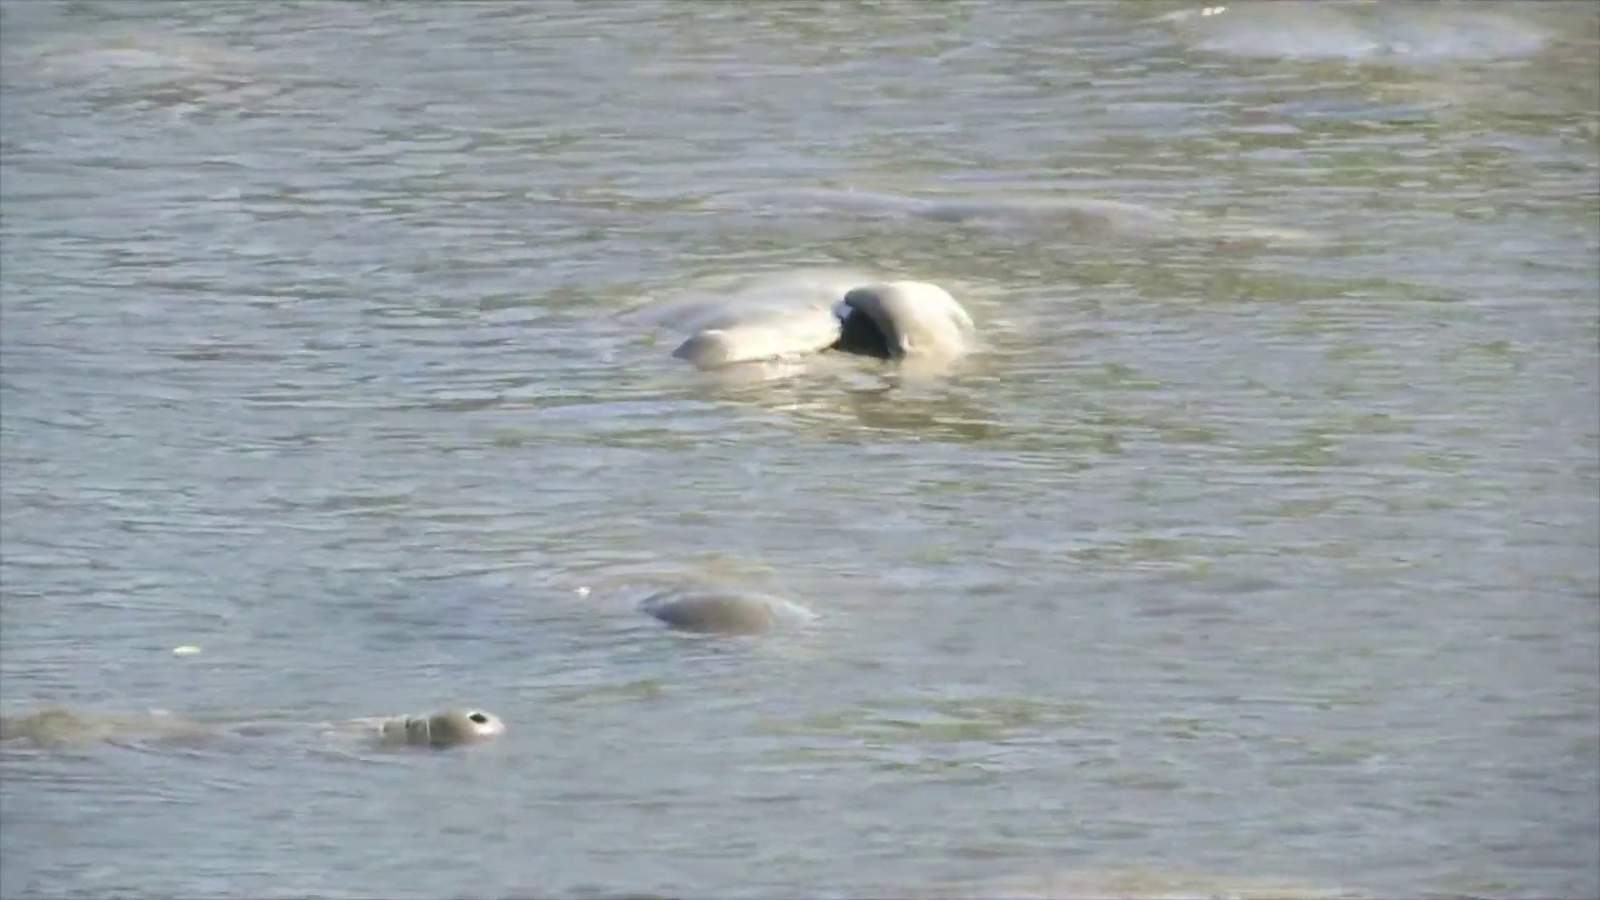 Pandemic and more boats have not been good to Florida manatees